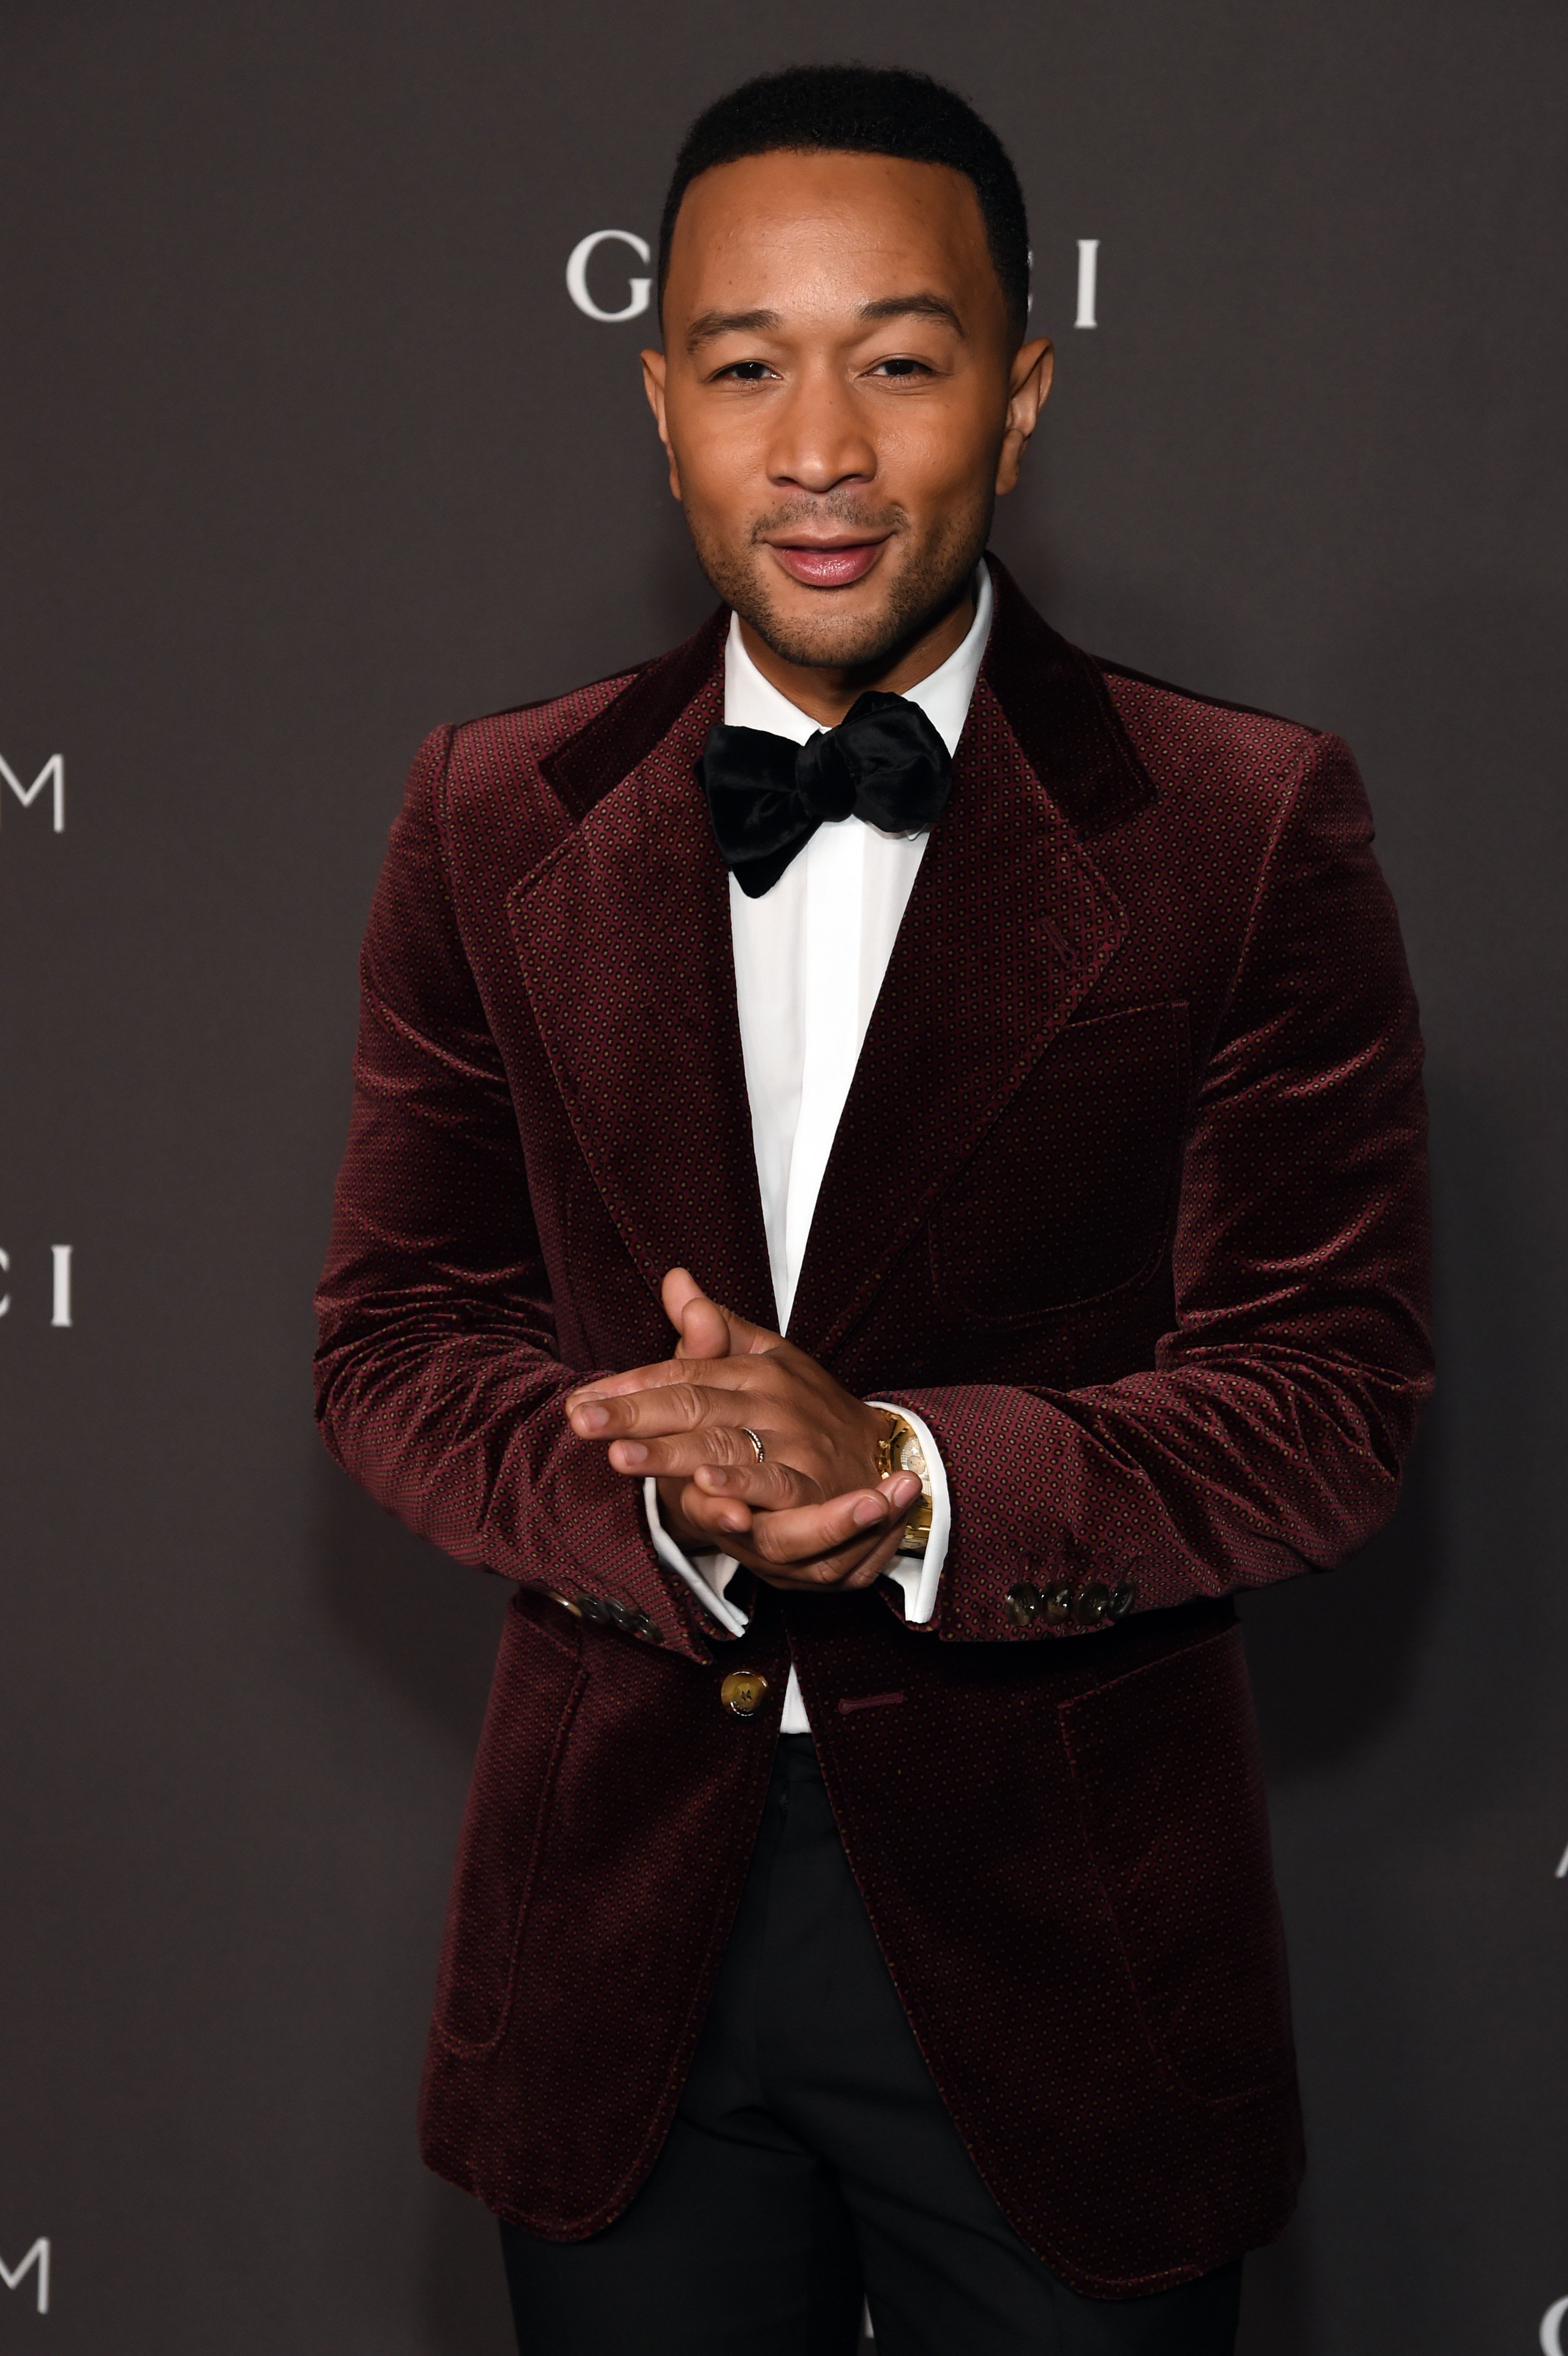 John Legend on November 02, 2019 in Los Angeles, California | Photo: Getty Images